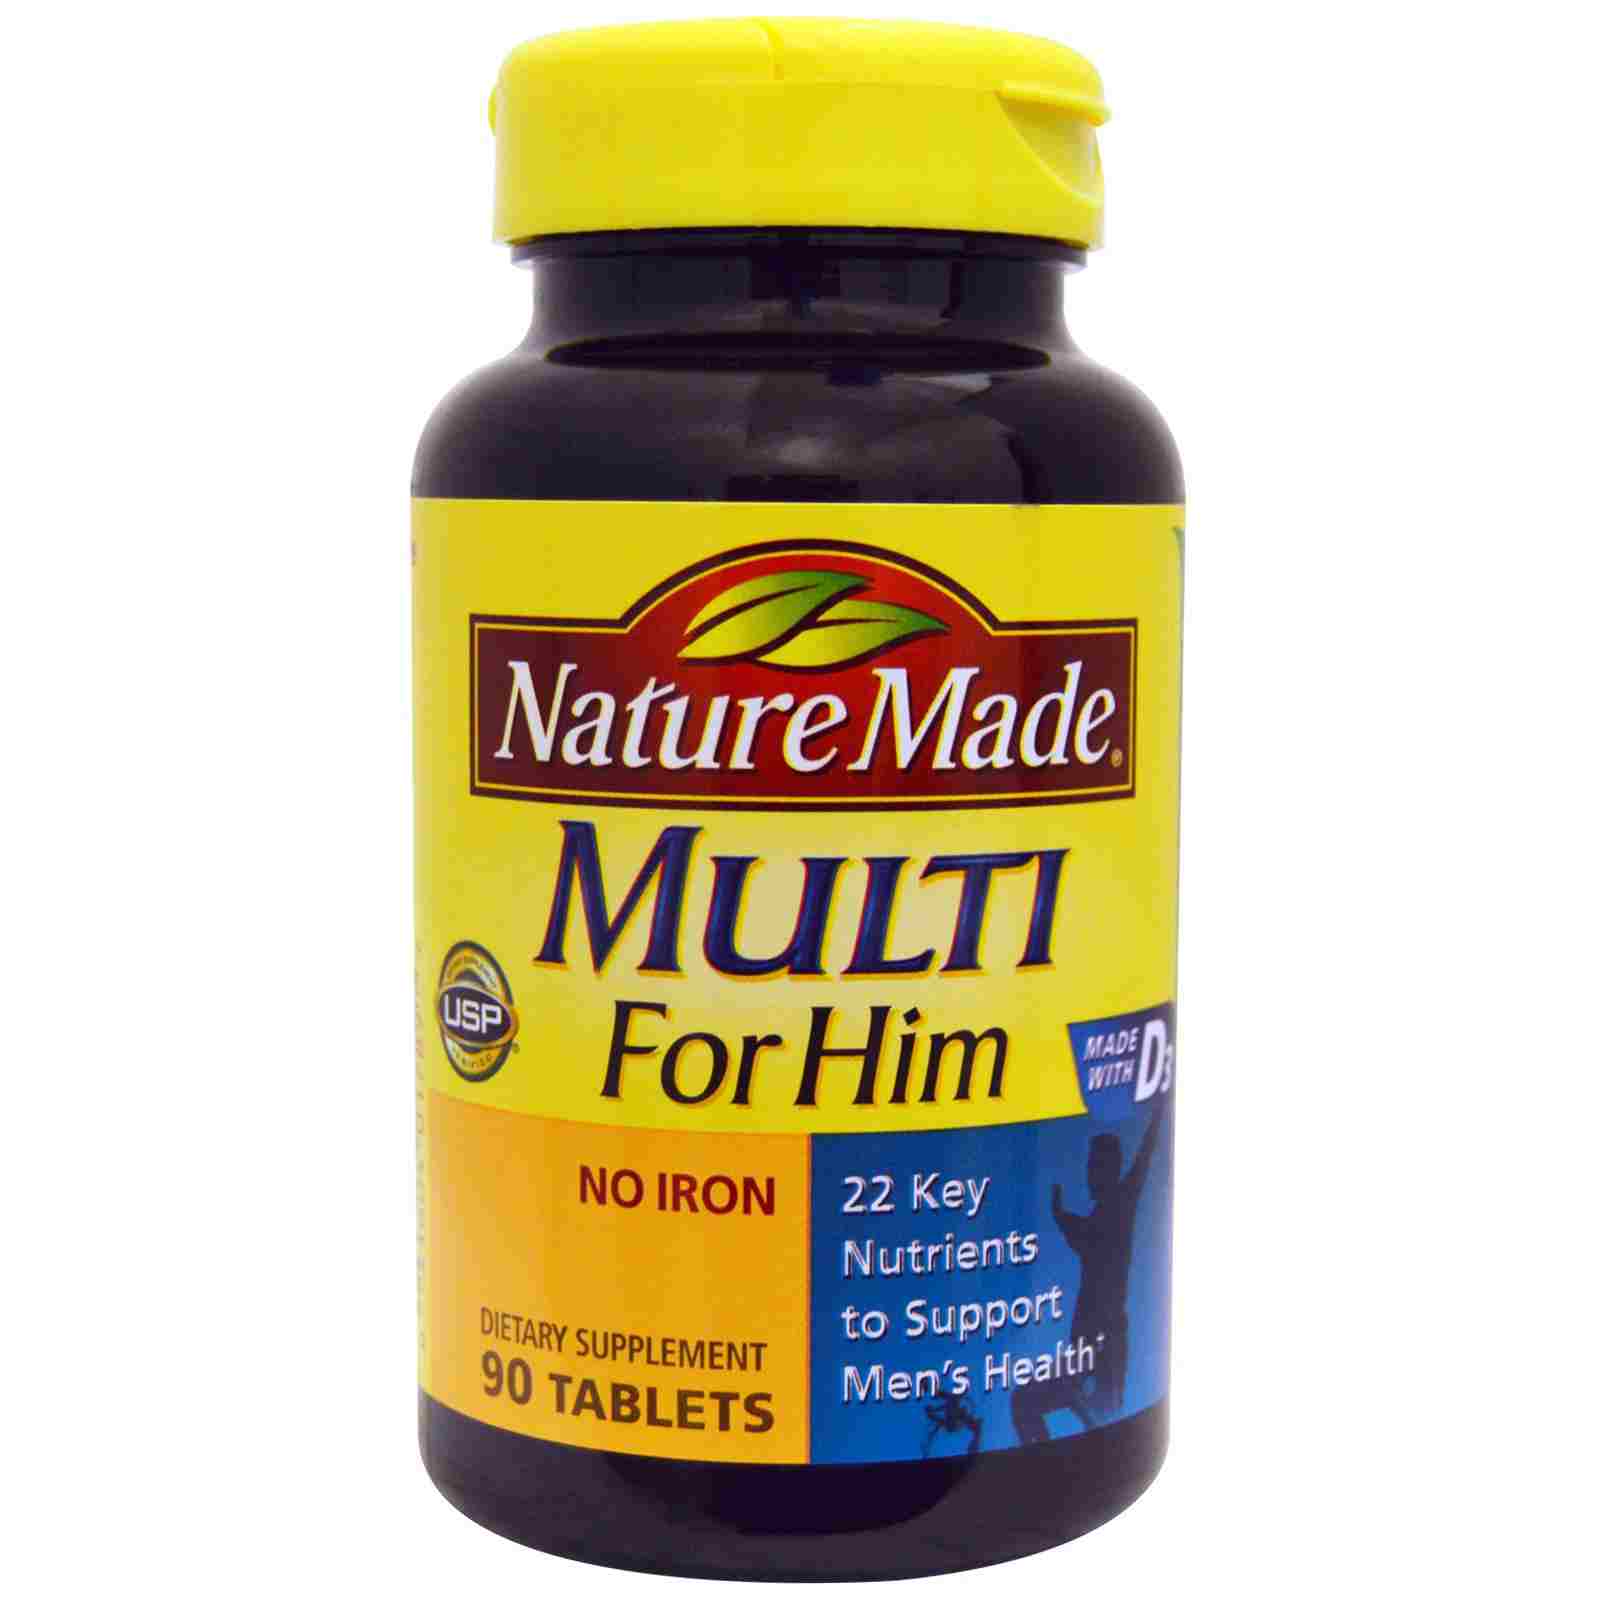 Nature Made Multi For Him Vitamin and Mineral